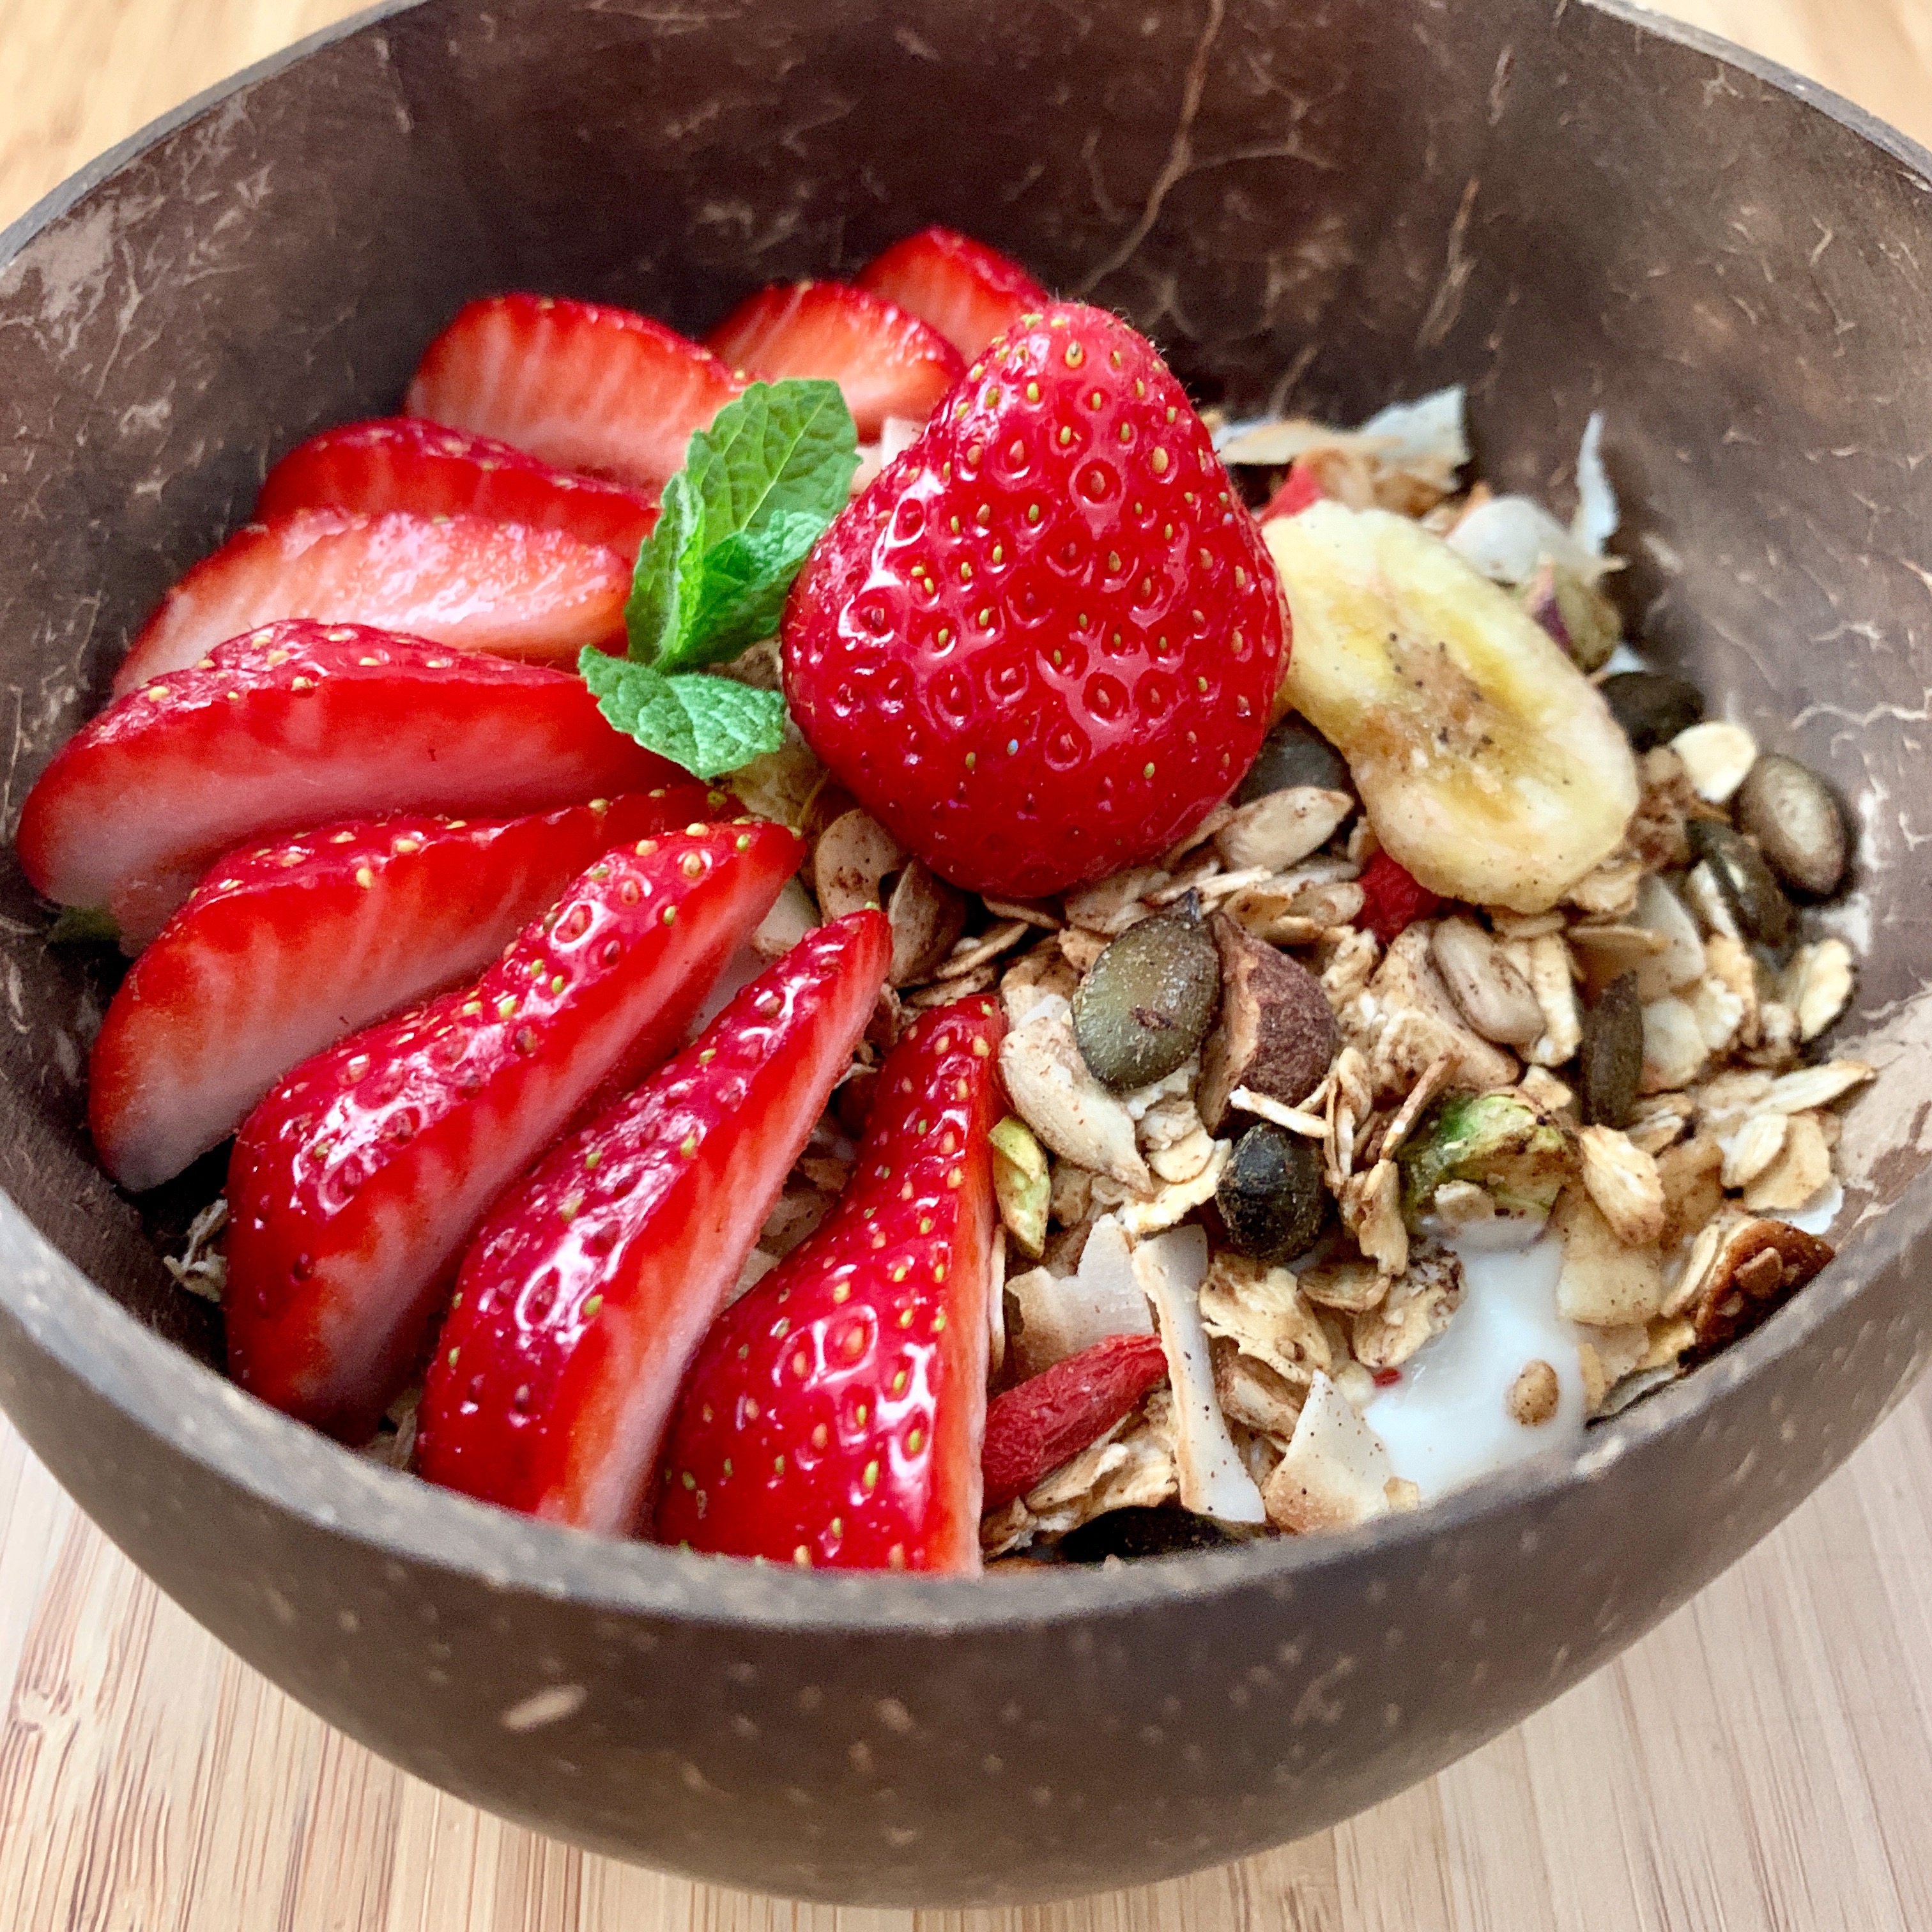 fraises 1 - This is an excuse to eat strawberries. (granola recipe)